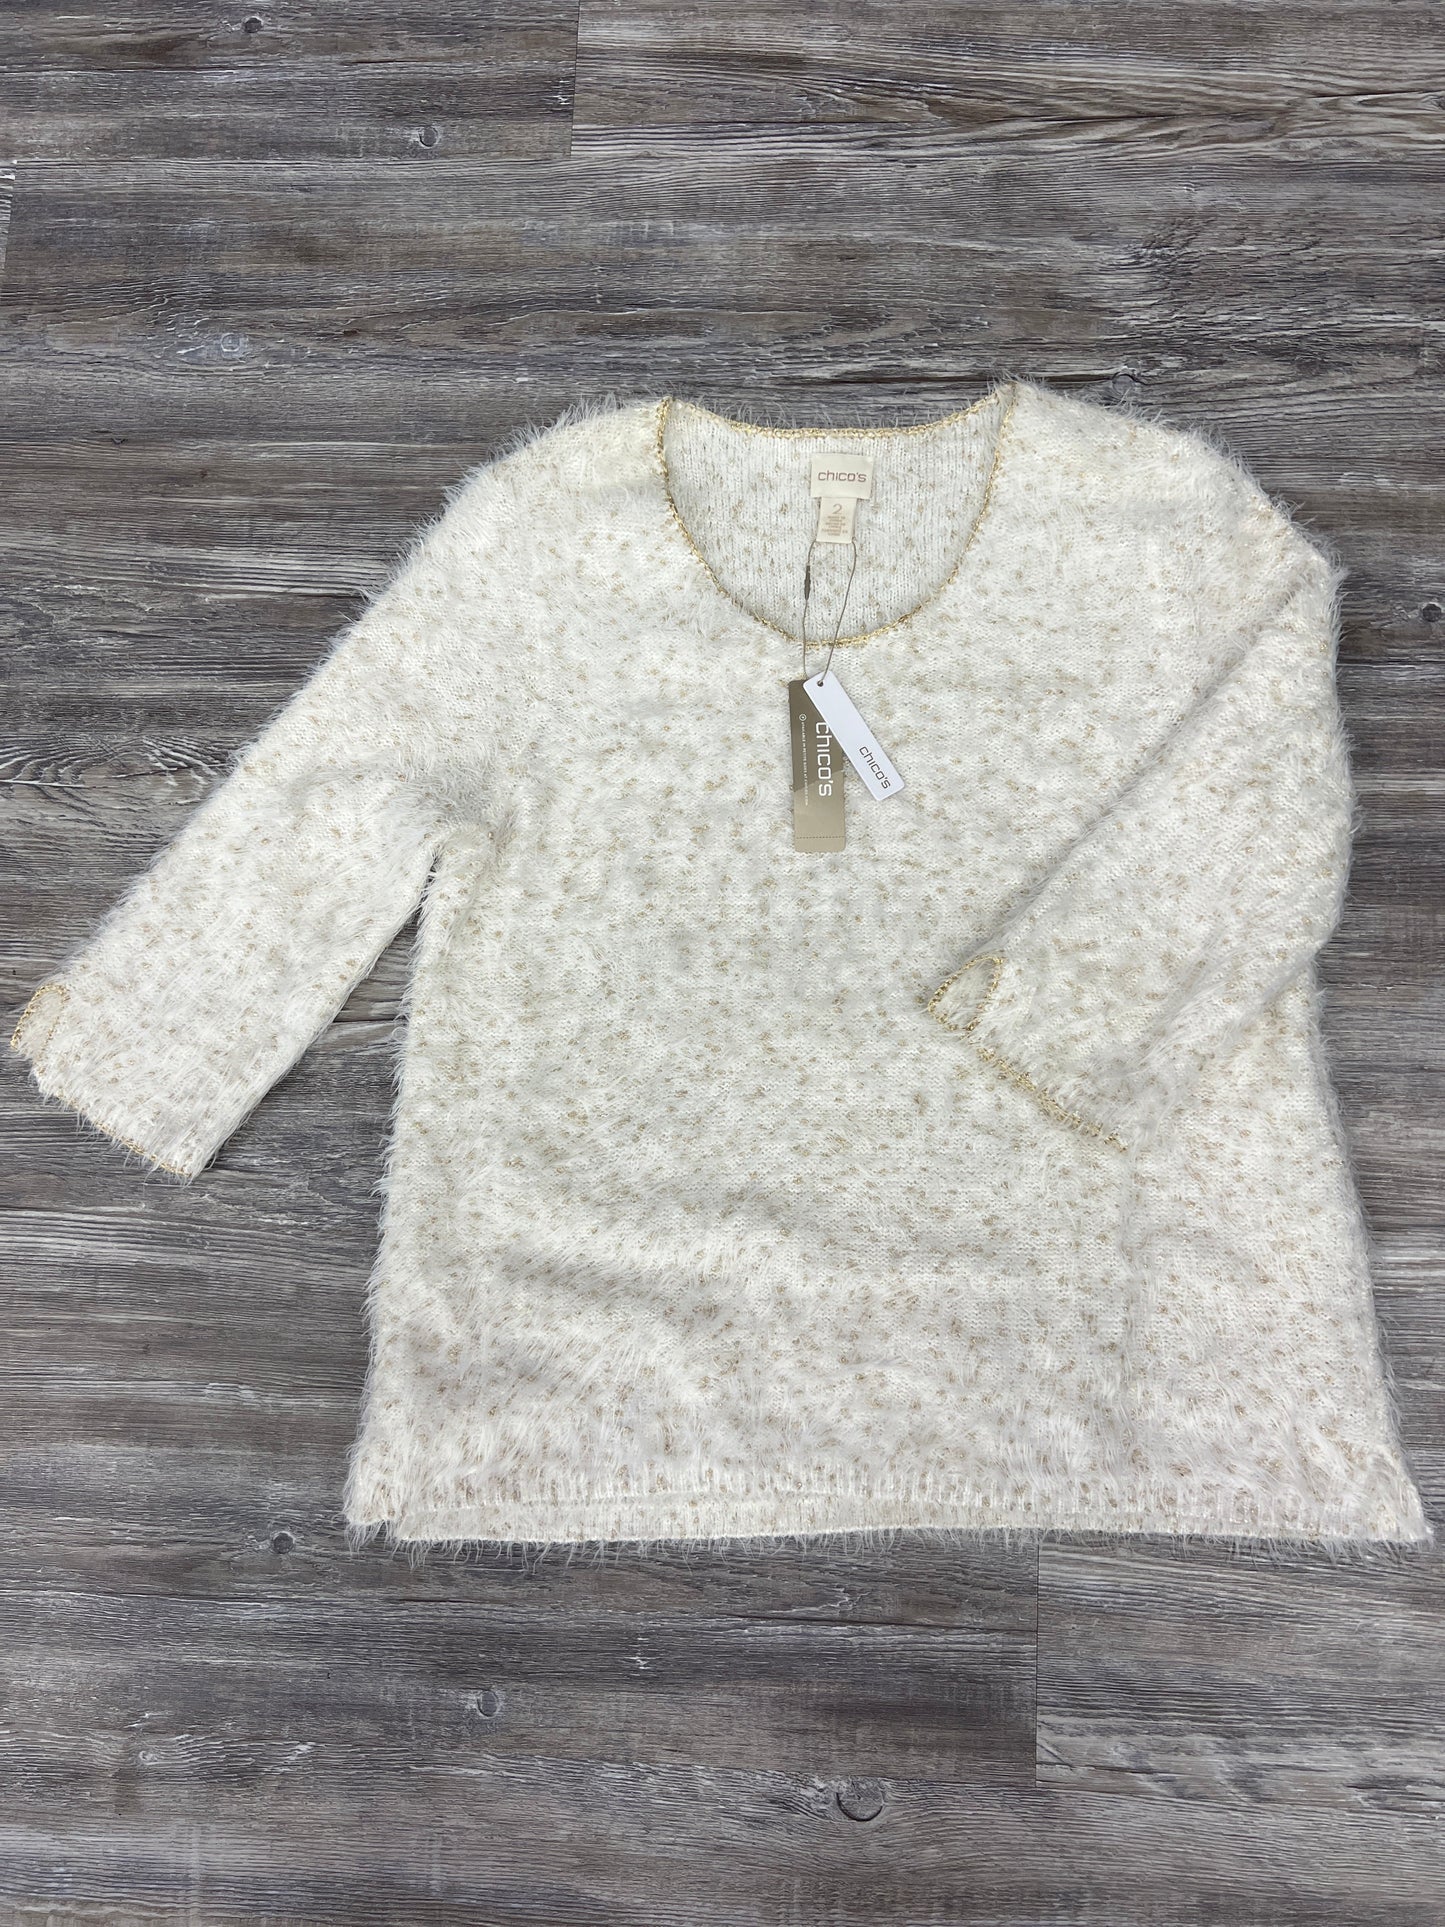 Sweater By Chicos Size: L